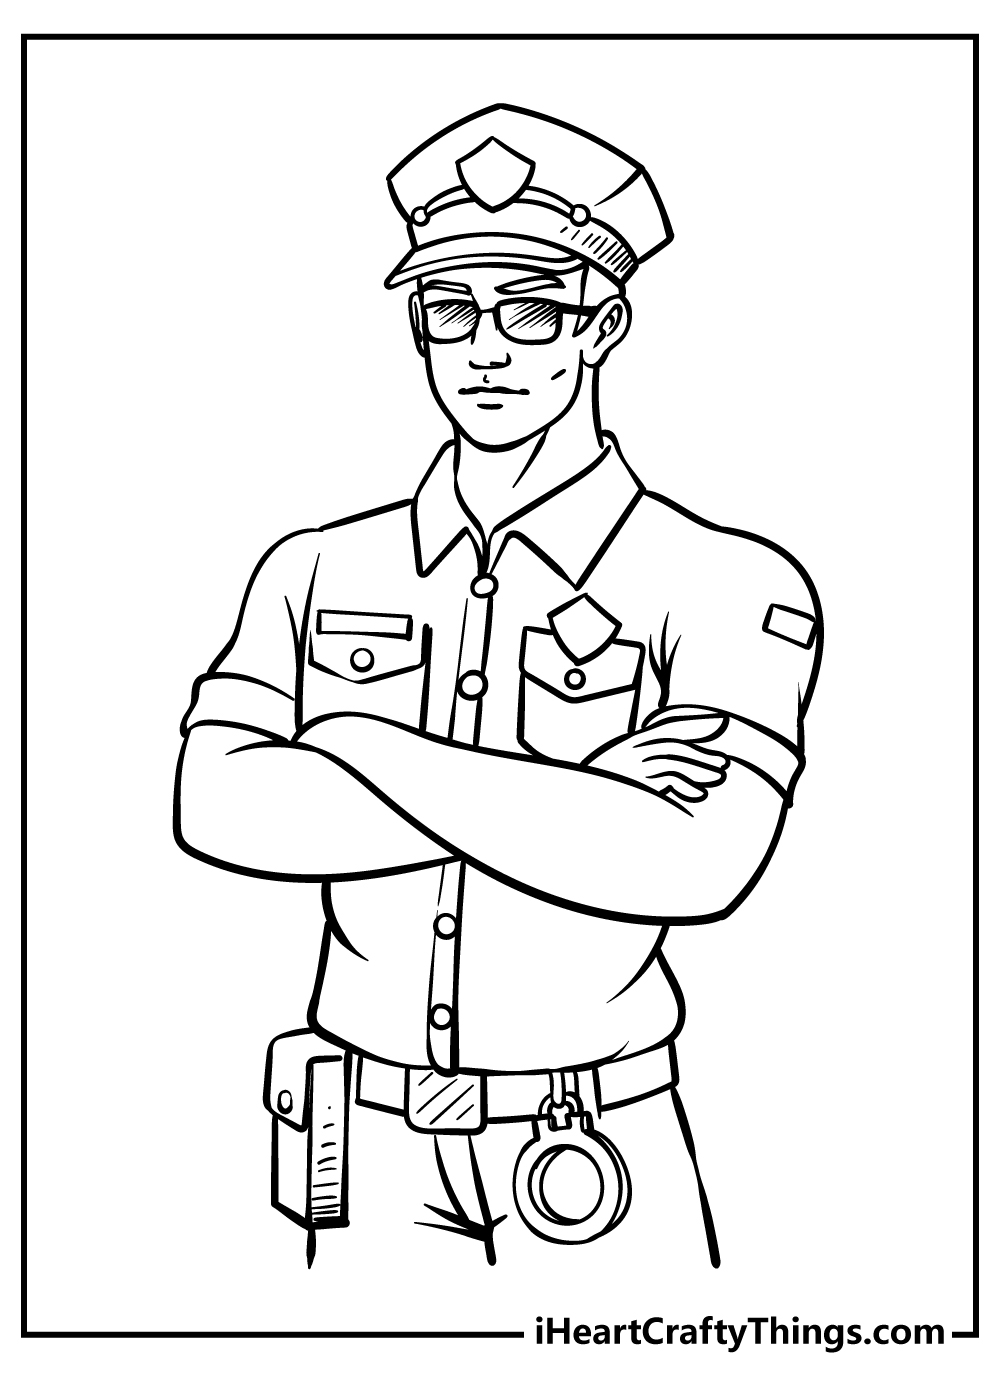 Police Coloring Book for adults free download